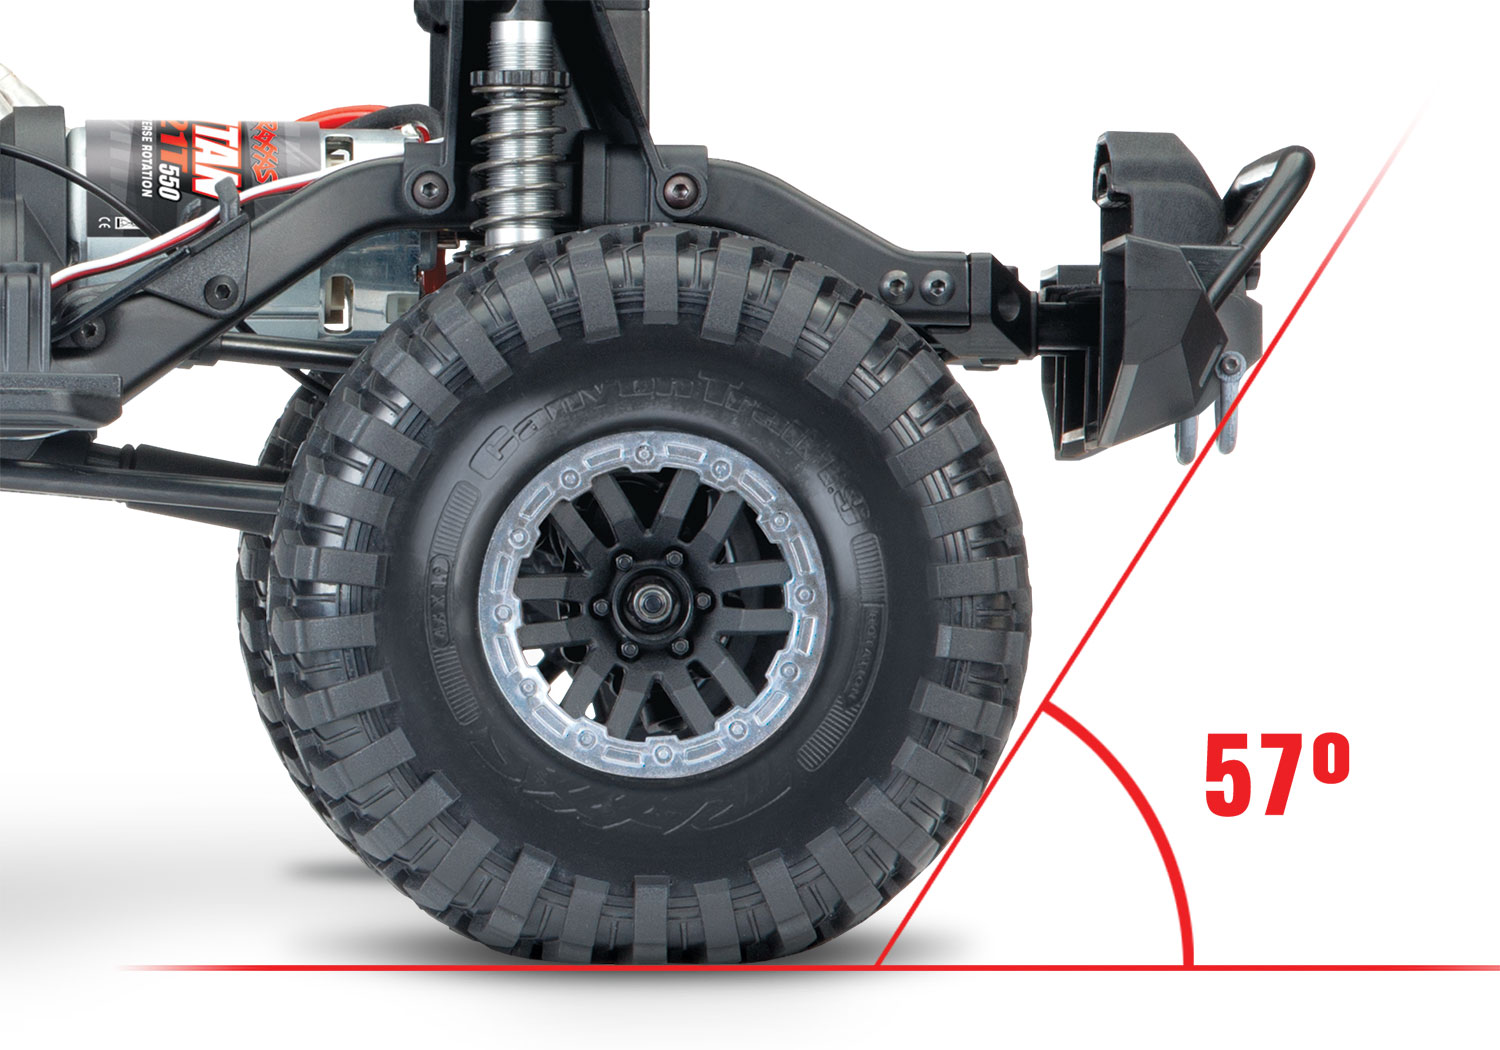 PACK ECO 100% RTR TRX-4 LAND ROVER DEFENDER SABLE LIPO 2S 5800 MAH CHARGEUR TRAXXAS SAC OFFERT